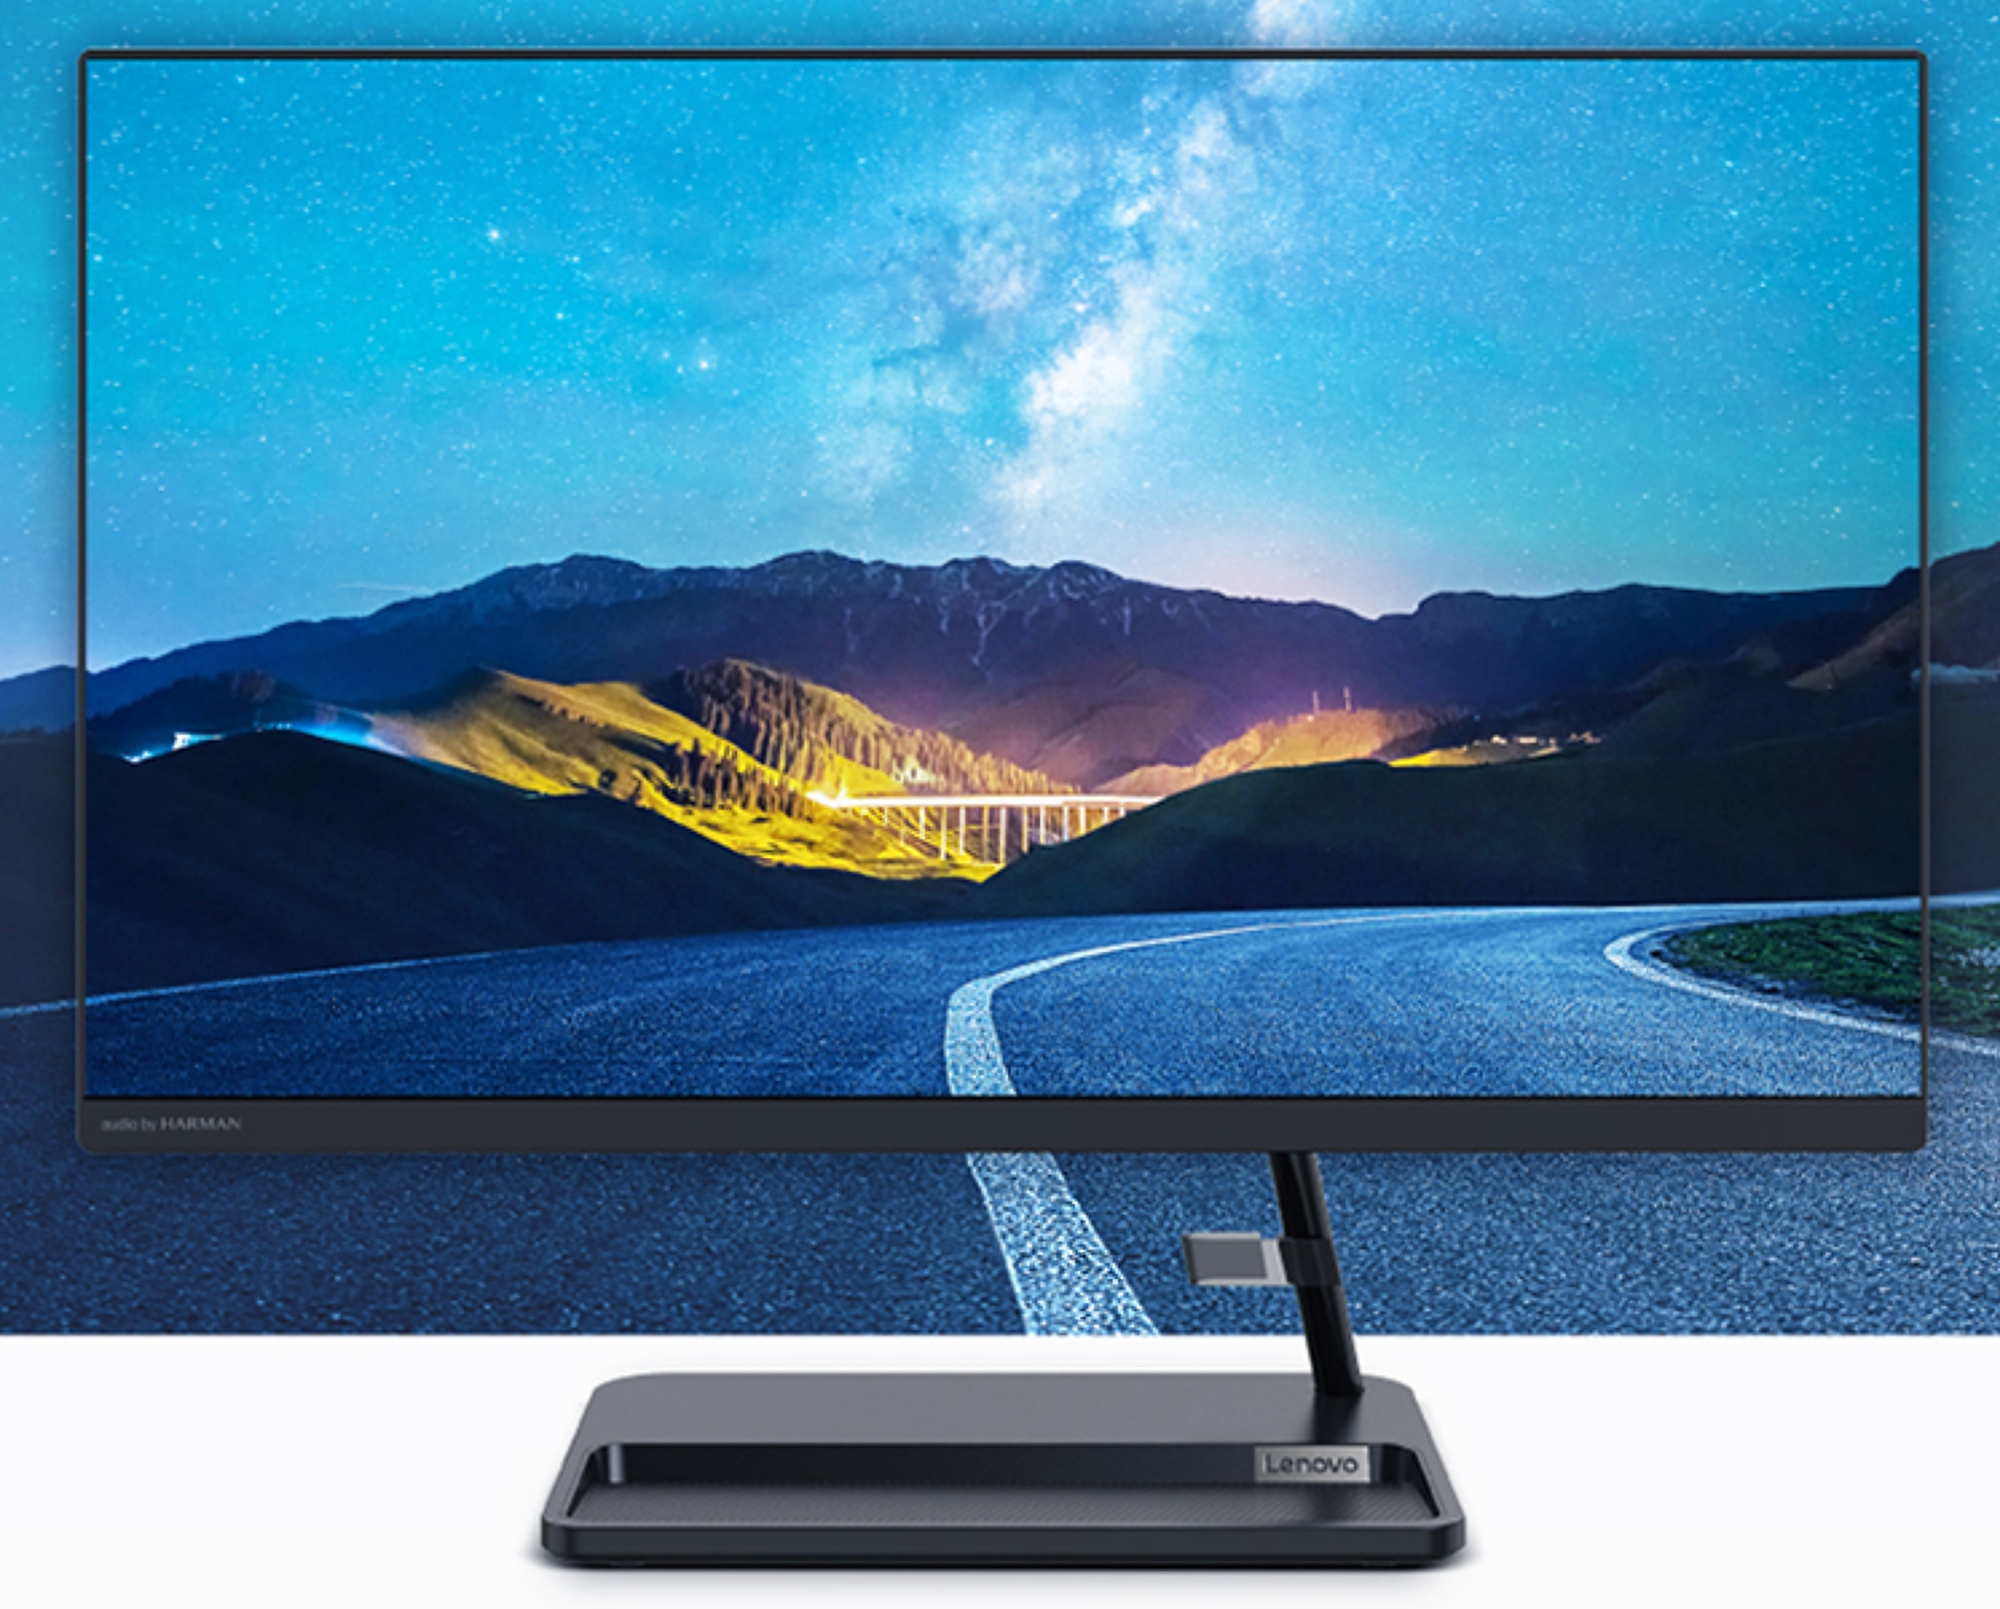 Lenovo AIO520: 23.8-inch FHD All-in-One PC with Sliding Webcam, 11th Gen Intel Core i5 and 16GB RAM